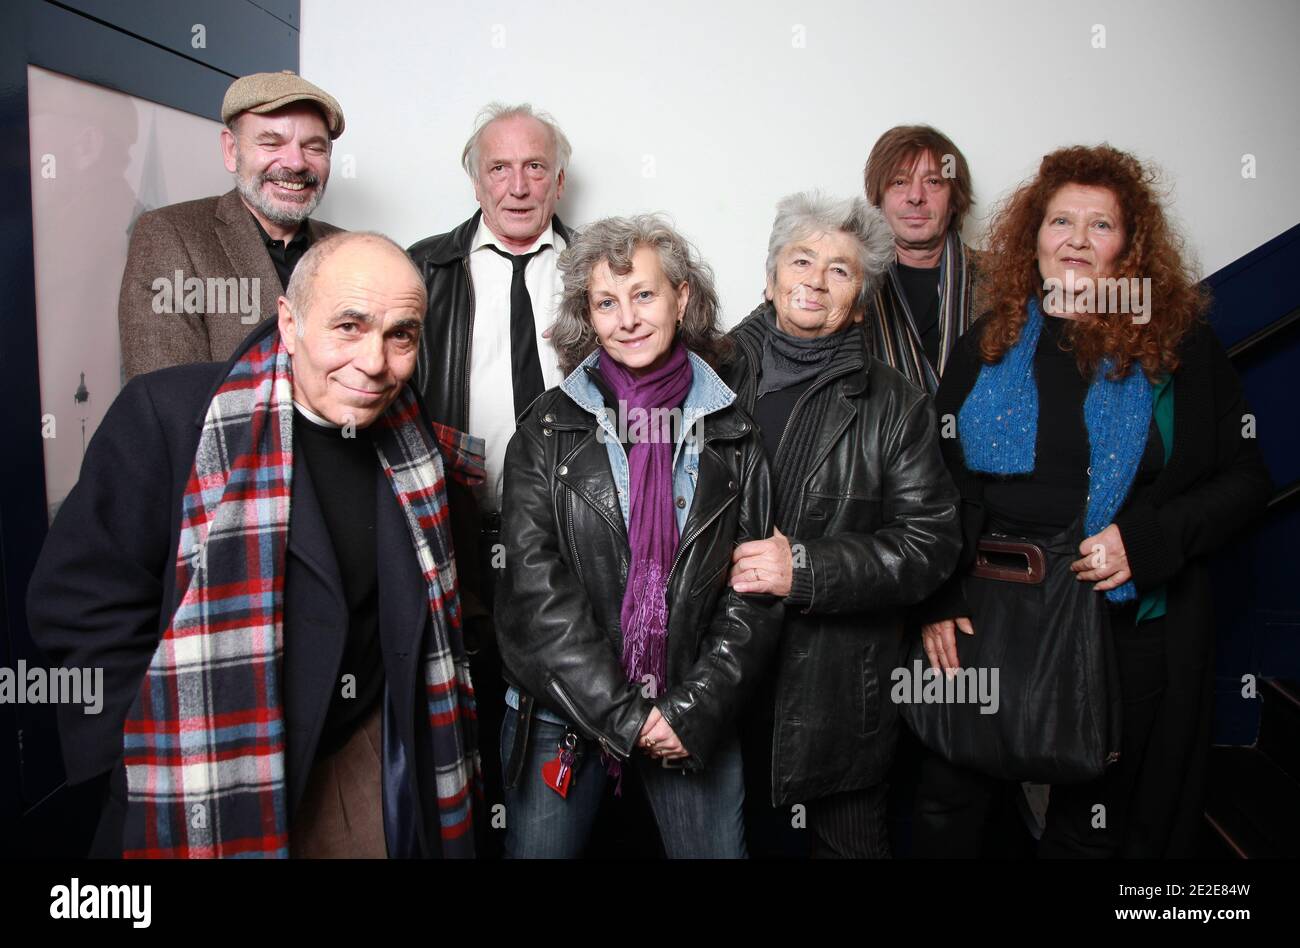 EXCLUSIVE. (L to R) Francois Monnie, Andre Wilms, Mimi and Little Bob and Evelyne Didi pose for our photographer during the premiere of 'Le Havre' held at Saint-Germain-des-Pres theater in Paris, France on November 28, 2011. Photo by Denis Guignebourg/ABACAPRESS.COM Stock Photo